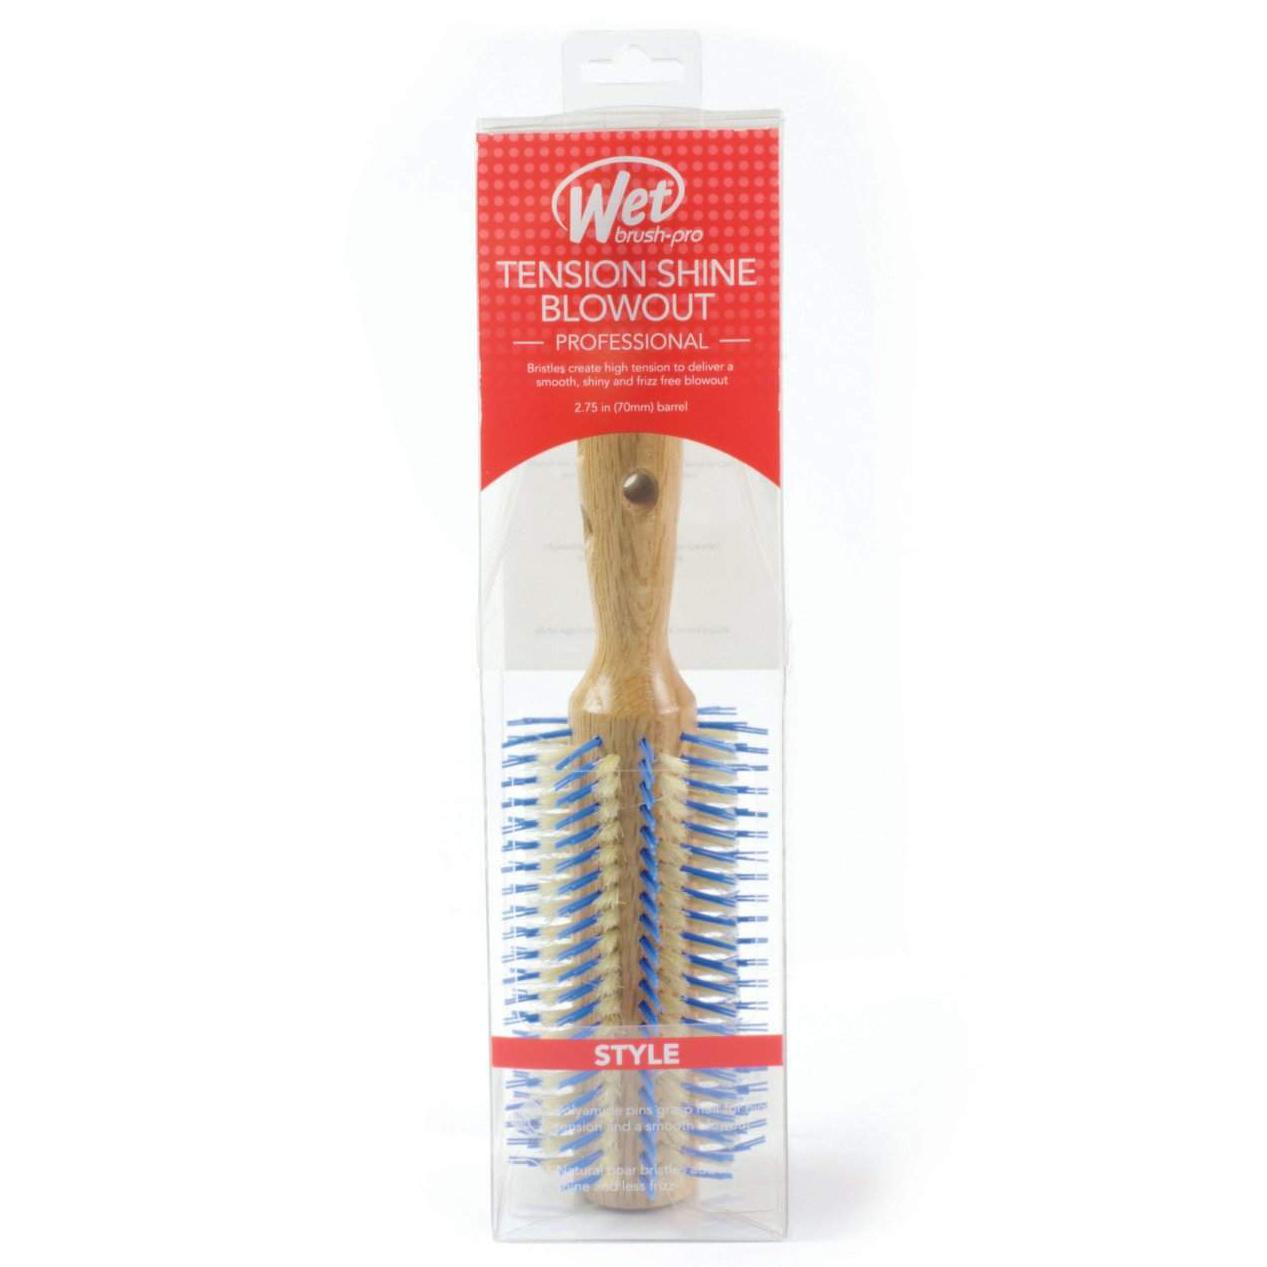 Wet Brush Tension Shine Blowout Brush-Wet Brush-Brand_Wet Brush,Collection_Hair,Collection_Tools and Brushes,Tool_Blowout Brushes,Tool_Brushes,Tool_Hair Tools,WET_Pro Round and Blowout Brushes